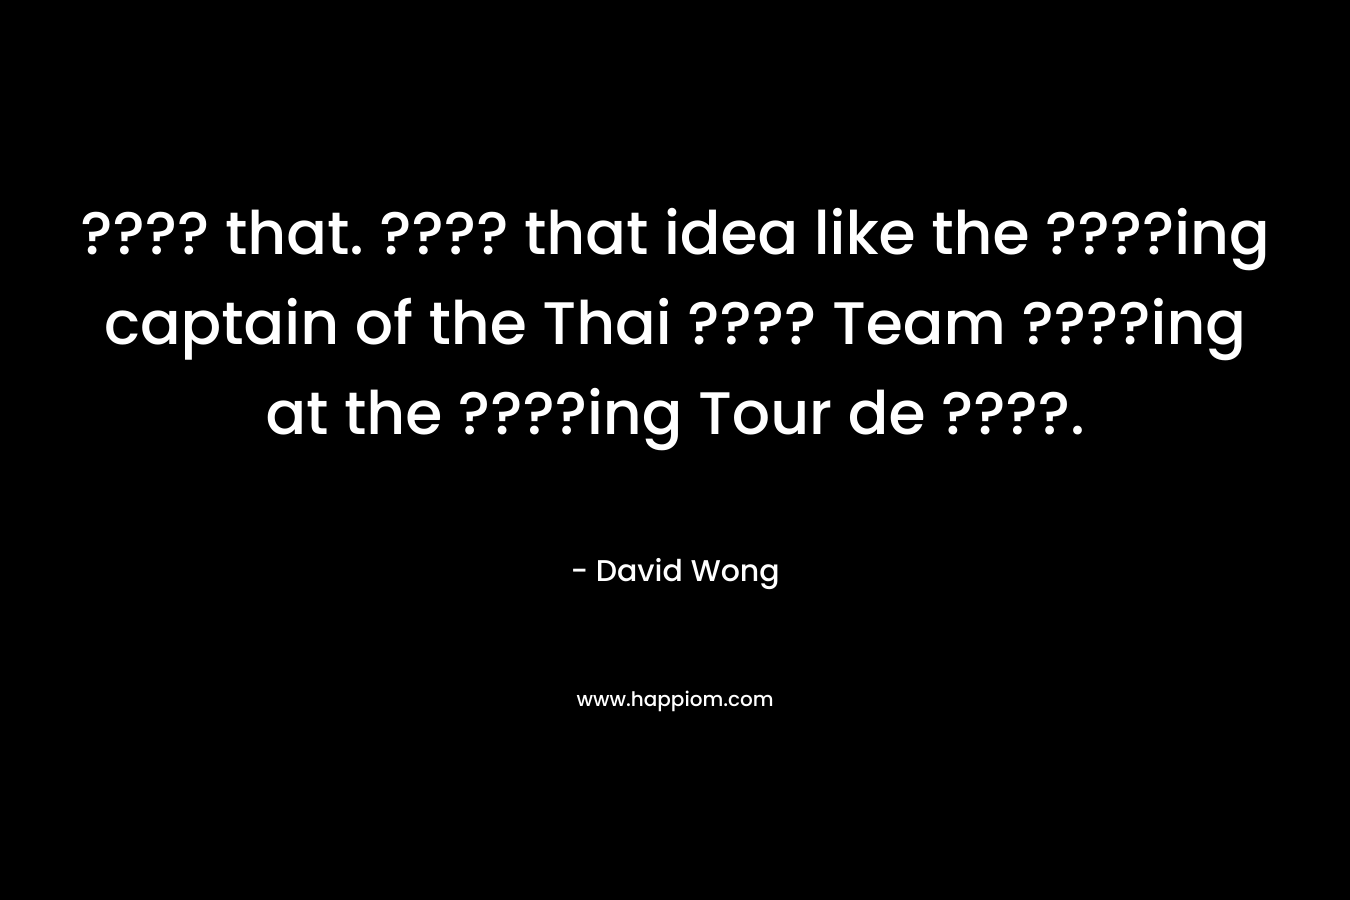 ???? that. ???? that idea like the ????ing captain of the Thai ???? Team ????ing at the ????ing Tour de ????.